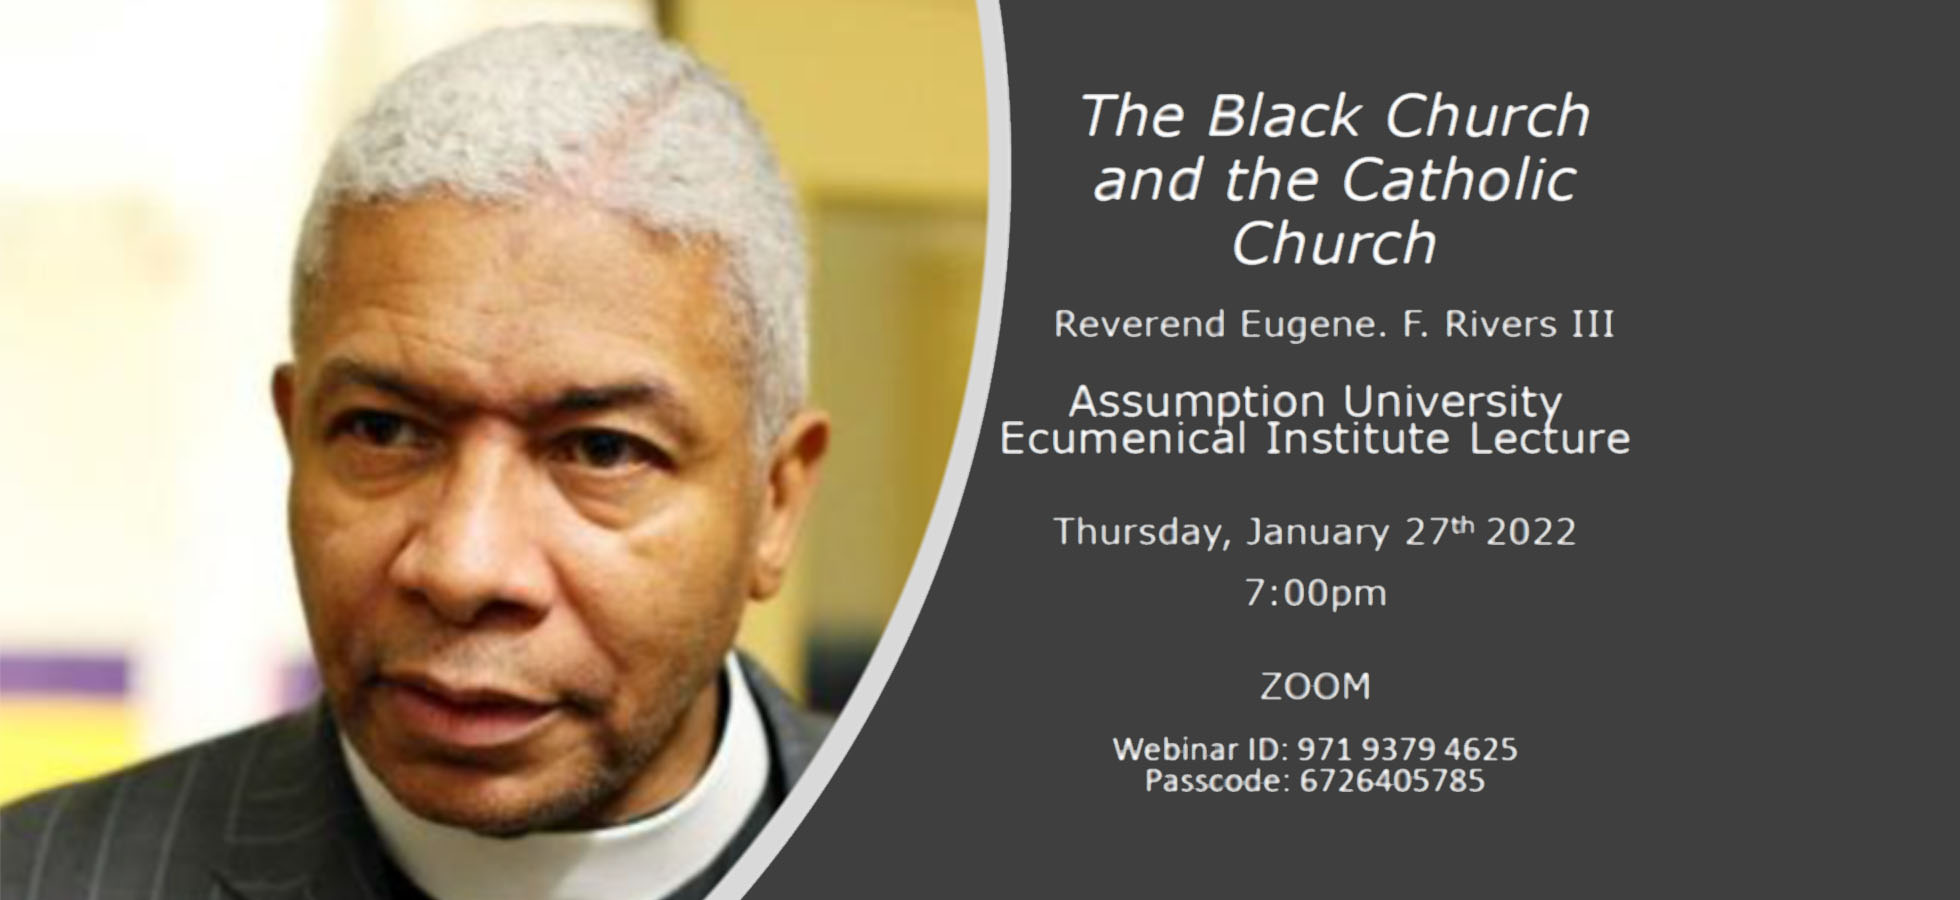 Graphic promoting Reverend Eugene F. Rivers III who will discuss the Black Church and the Catholic Church at Assumptoin University.